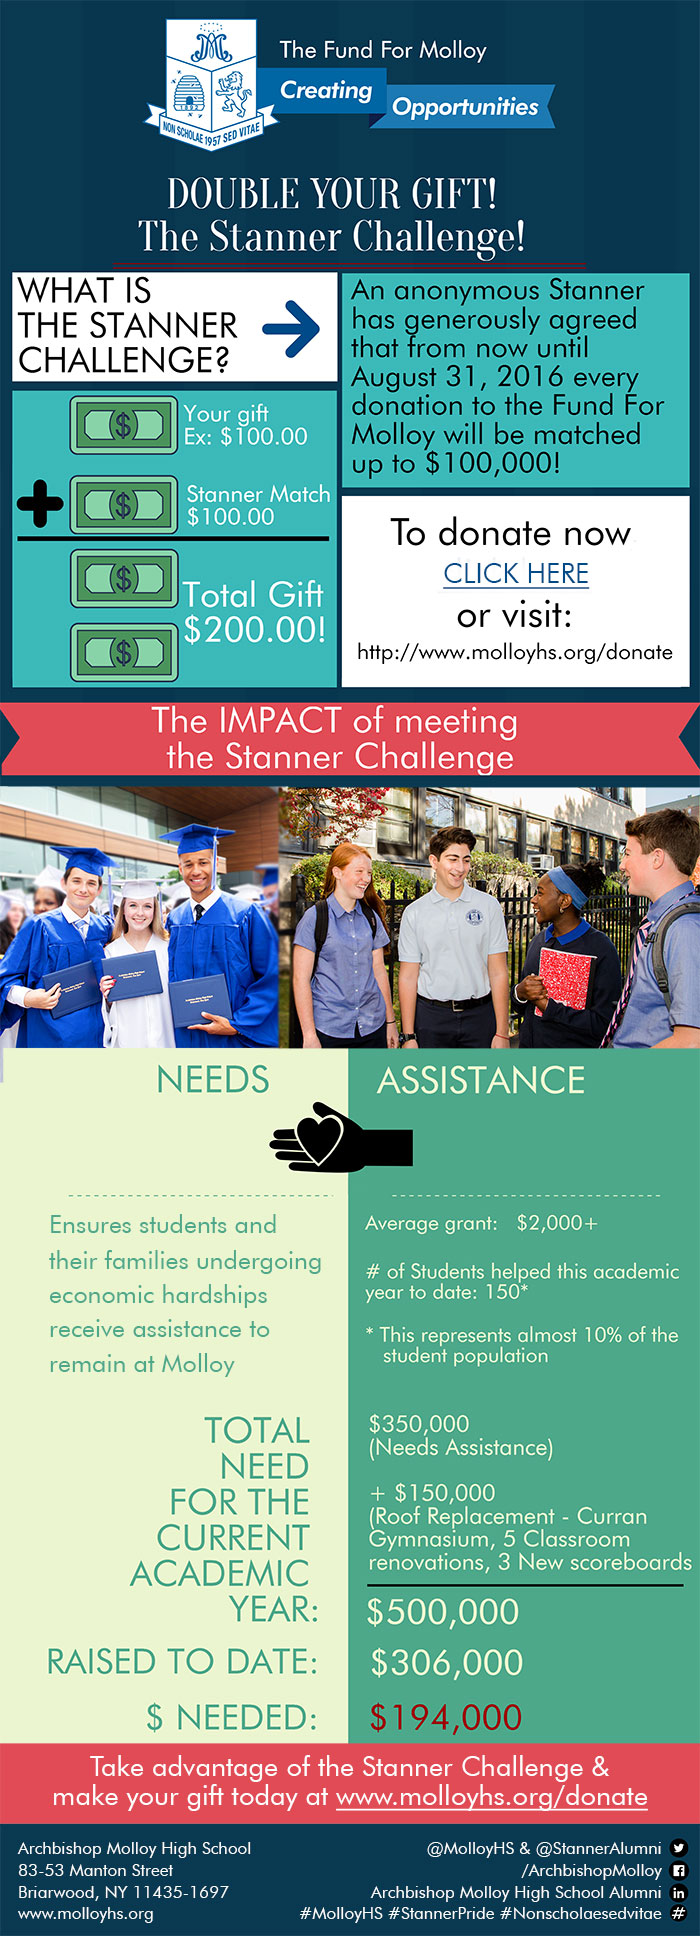 Fund For Molloy Stanner Challenge